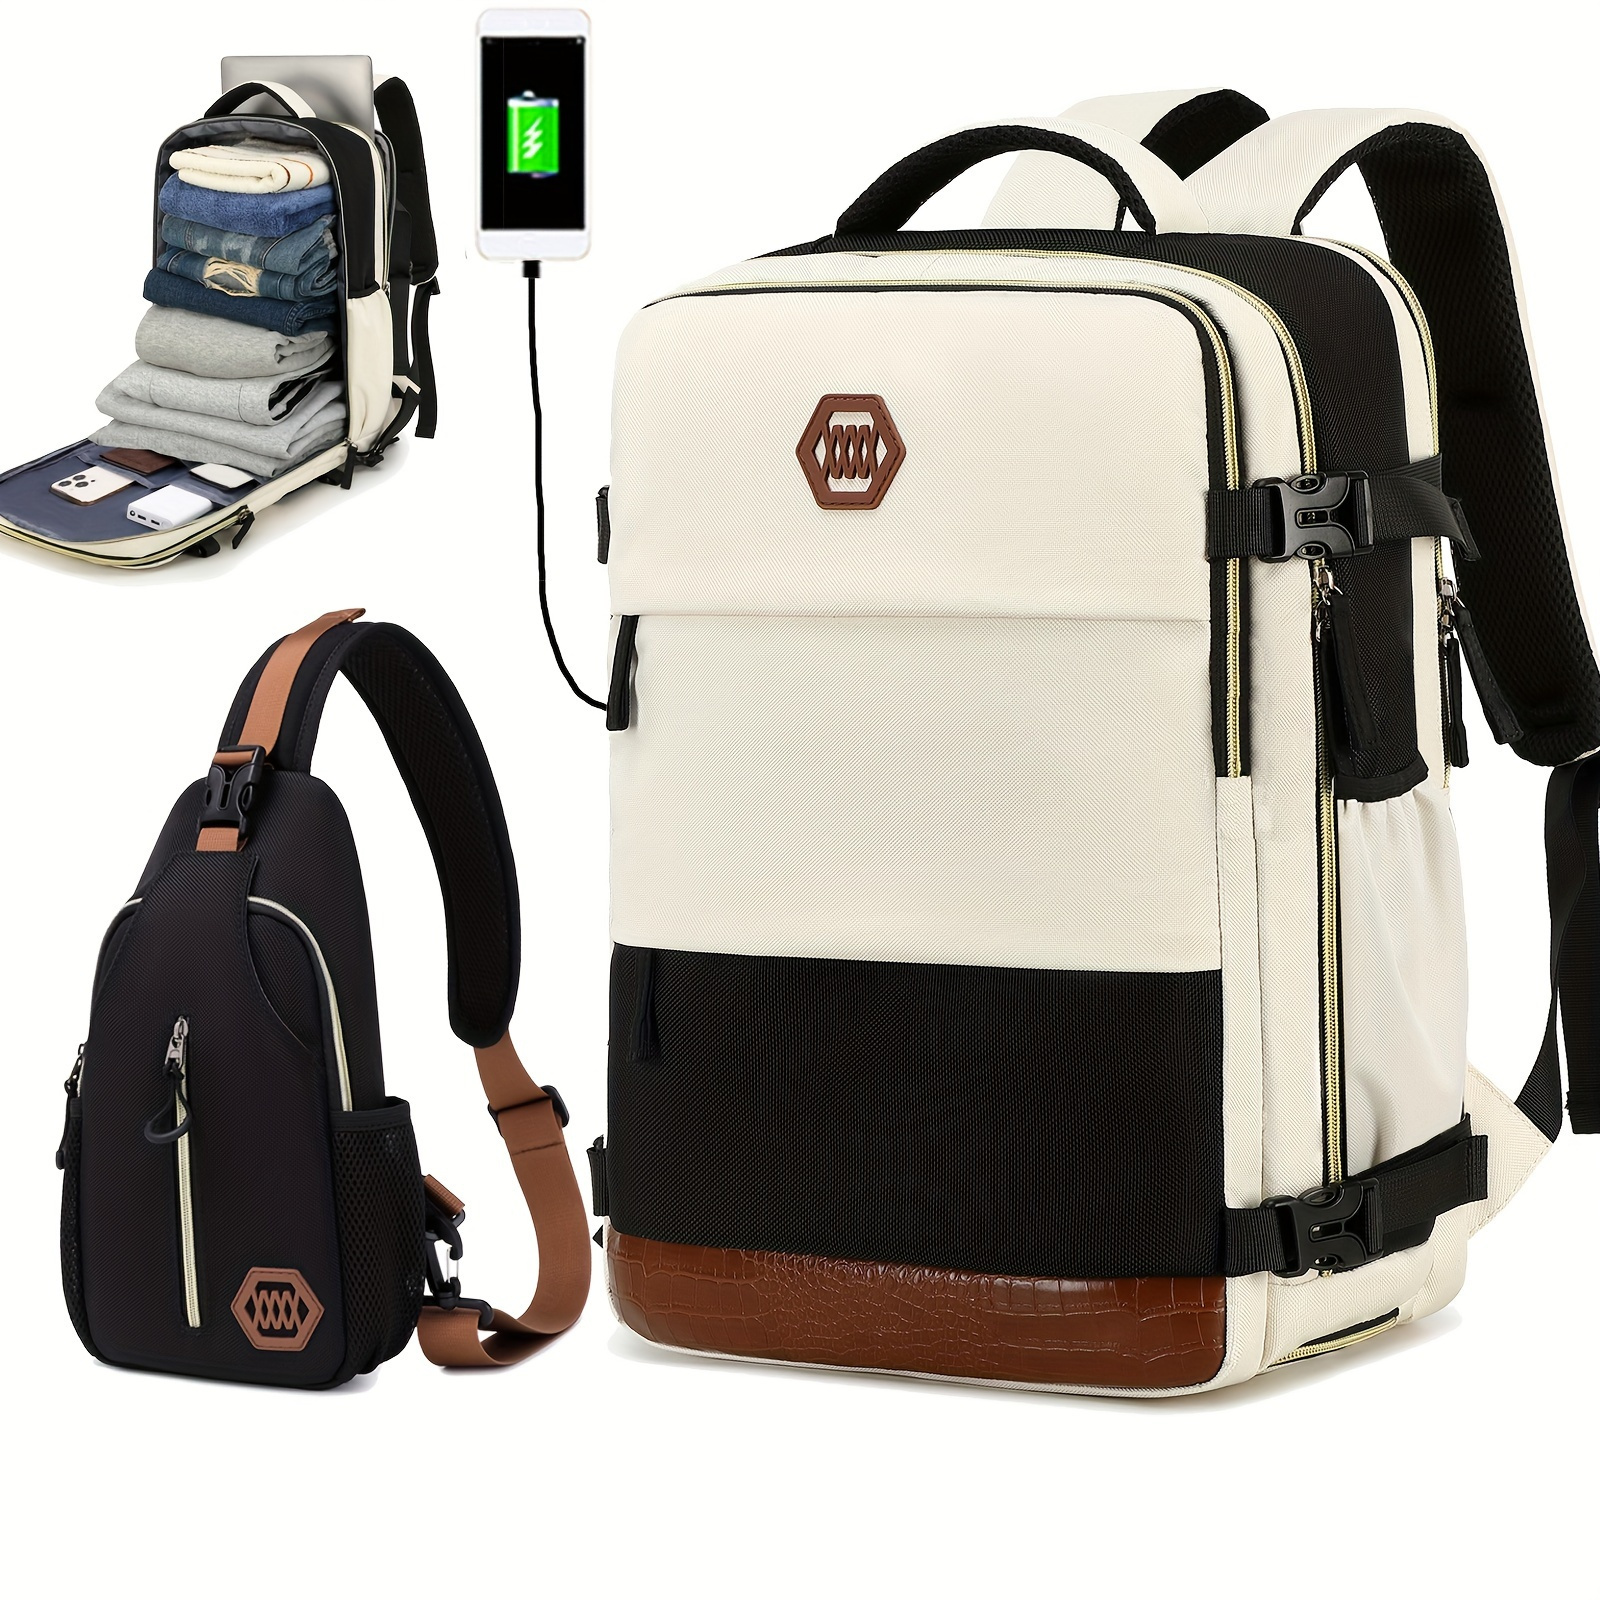 

Flight-approved Carry-on Backpack With Shoe Compartment, Travel Luggage Daypack, Business Computer Schoolbag